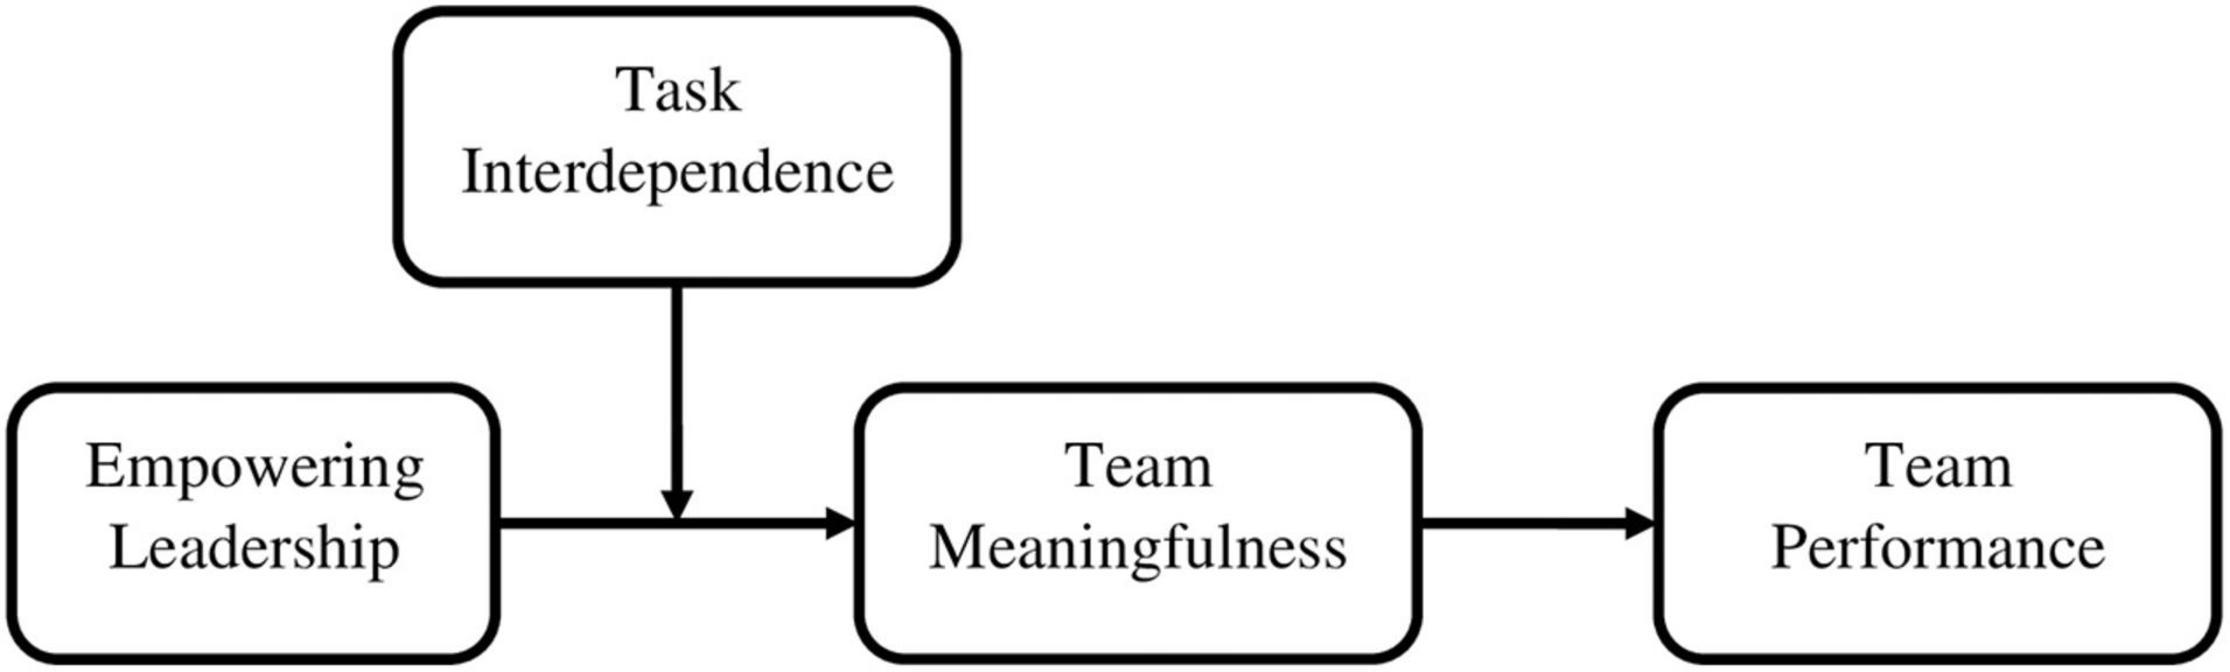 Frontiers  Team Interdependence as a Substitute for Empowering Leadership  Contribution to Team Meaningfulness and Performance